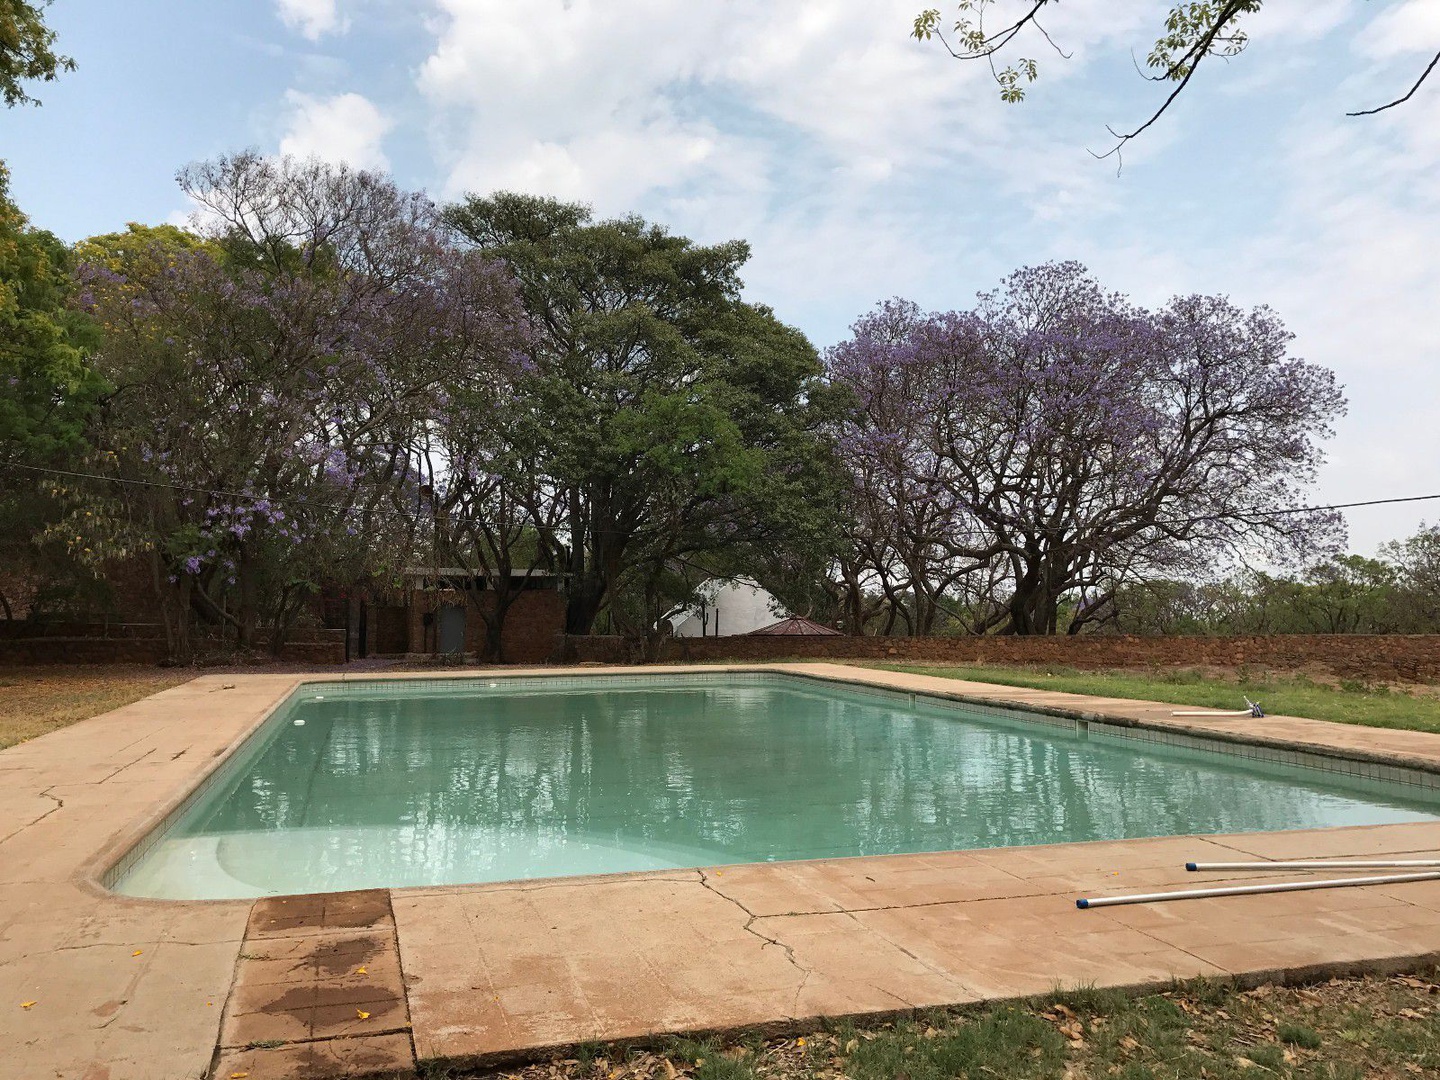 Land in Farms - Enclosed Swimming pool area